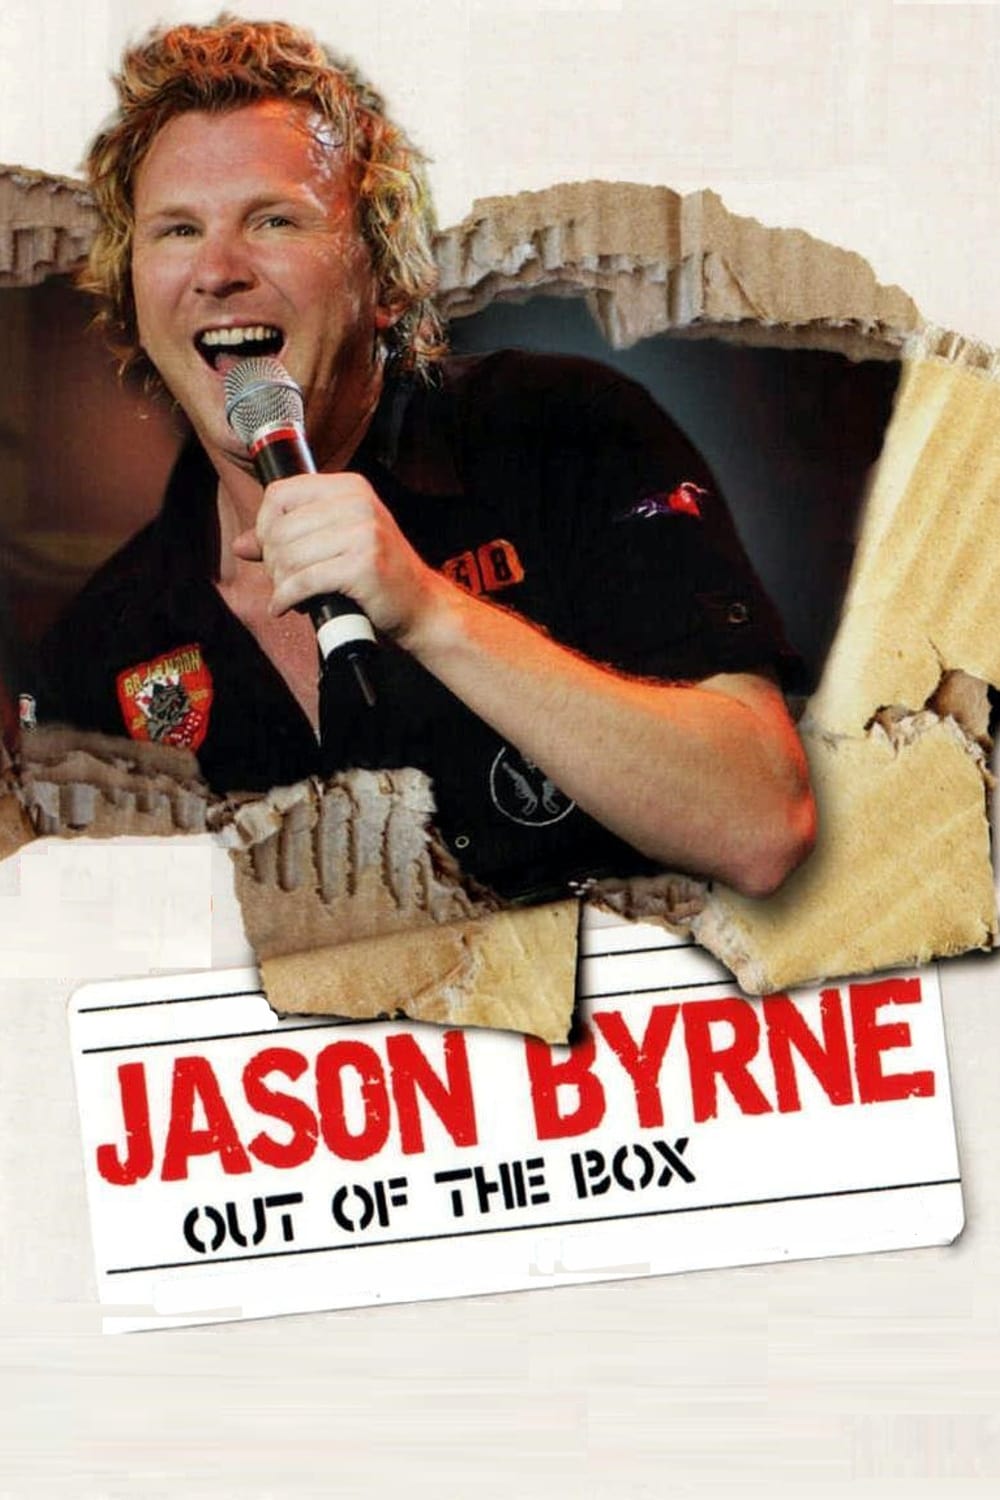 Jason Byrne: Out of the Box